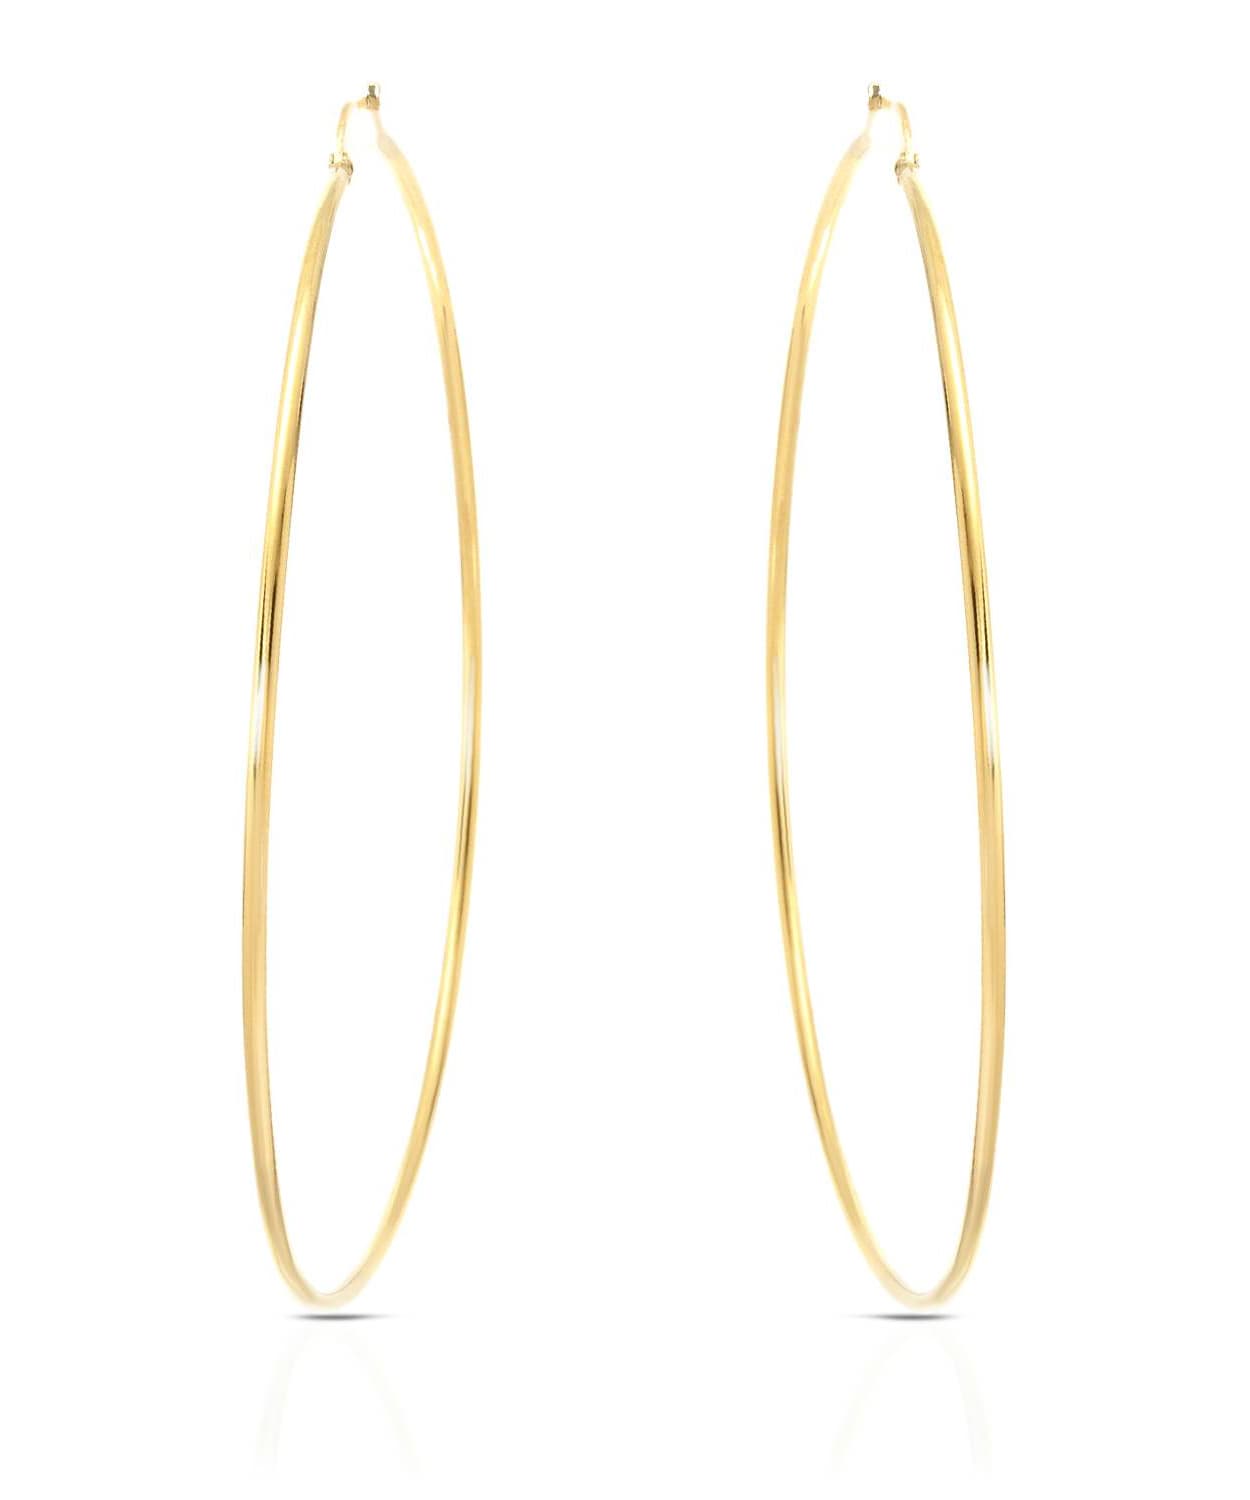 71mm Exra Large14k Yellow Gold Minimalistic Hoop Earrings View 1